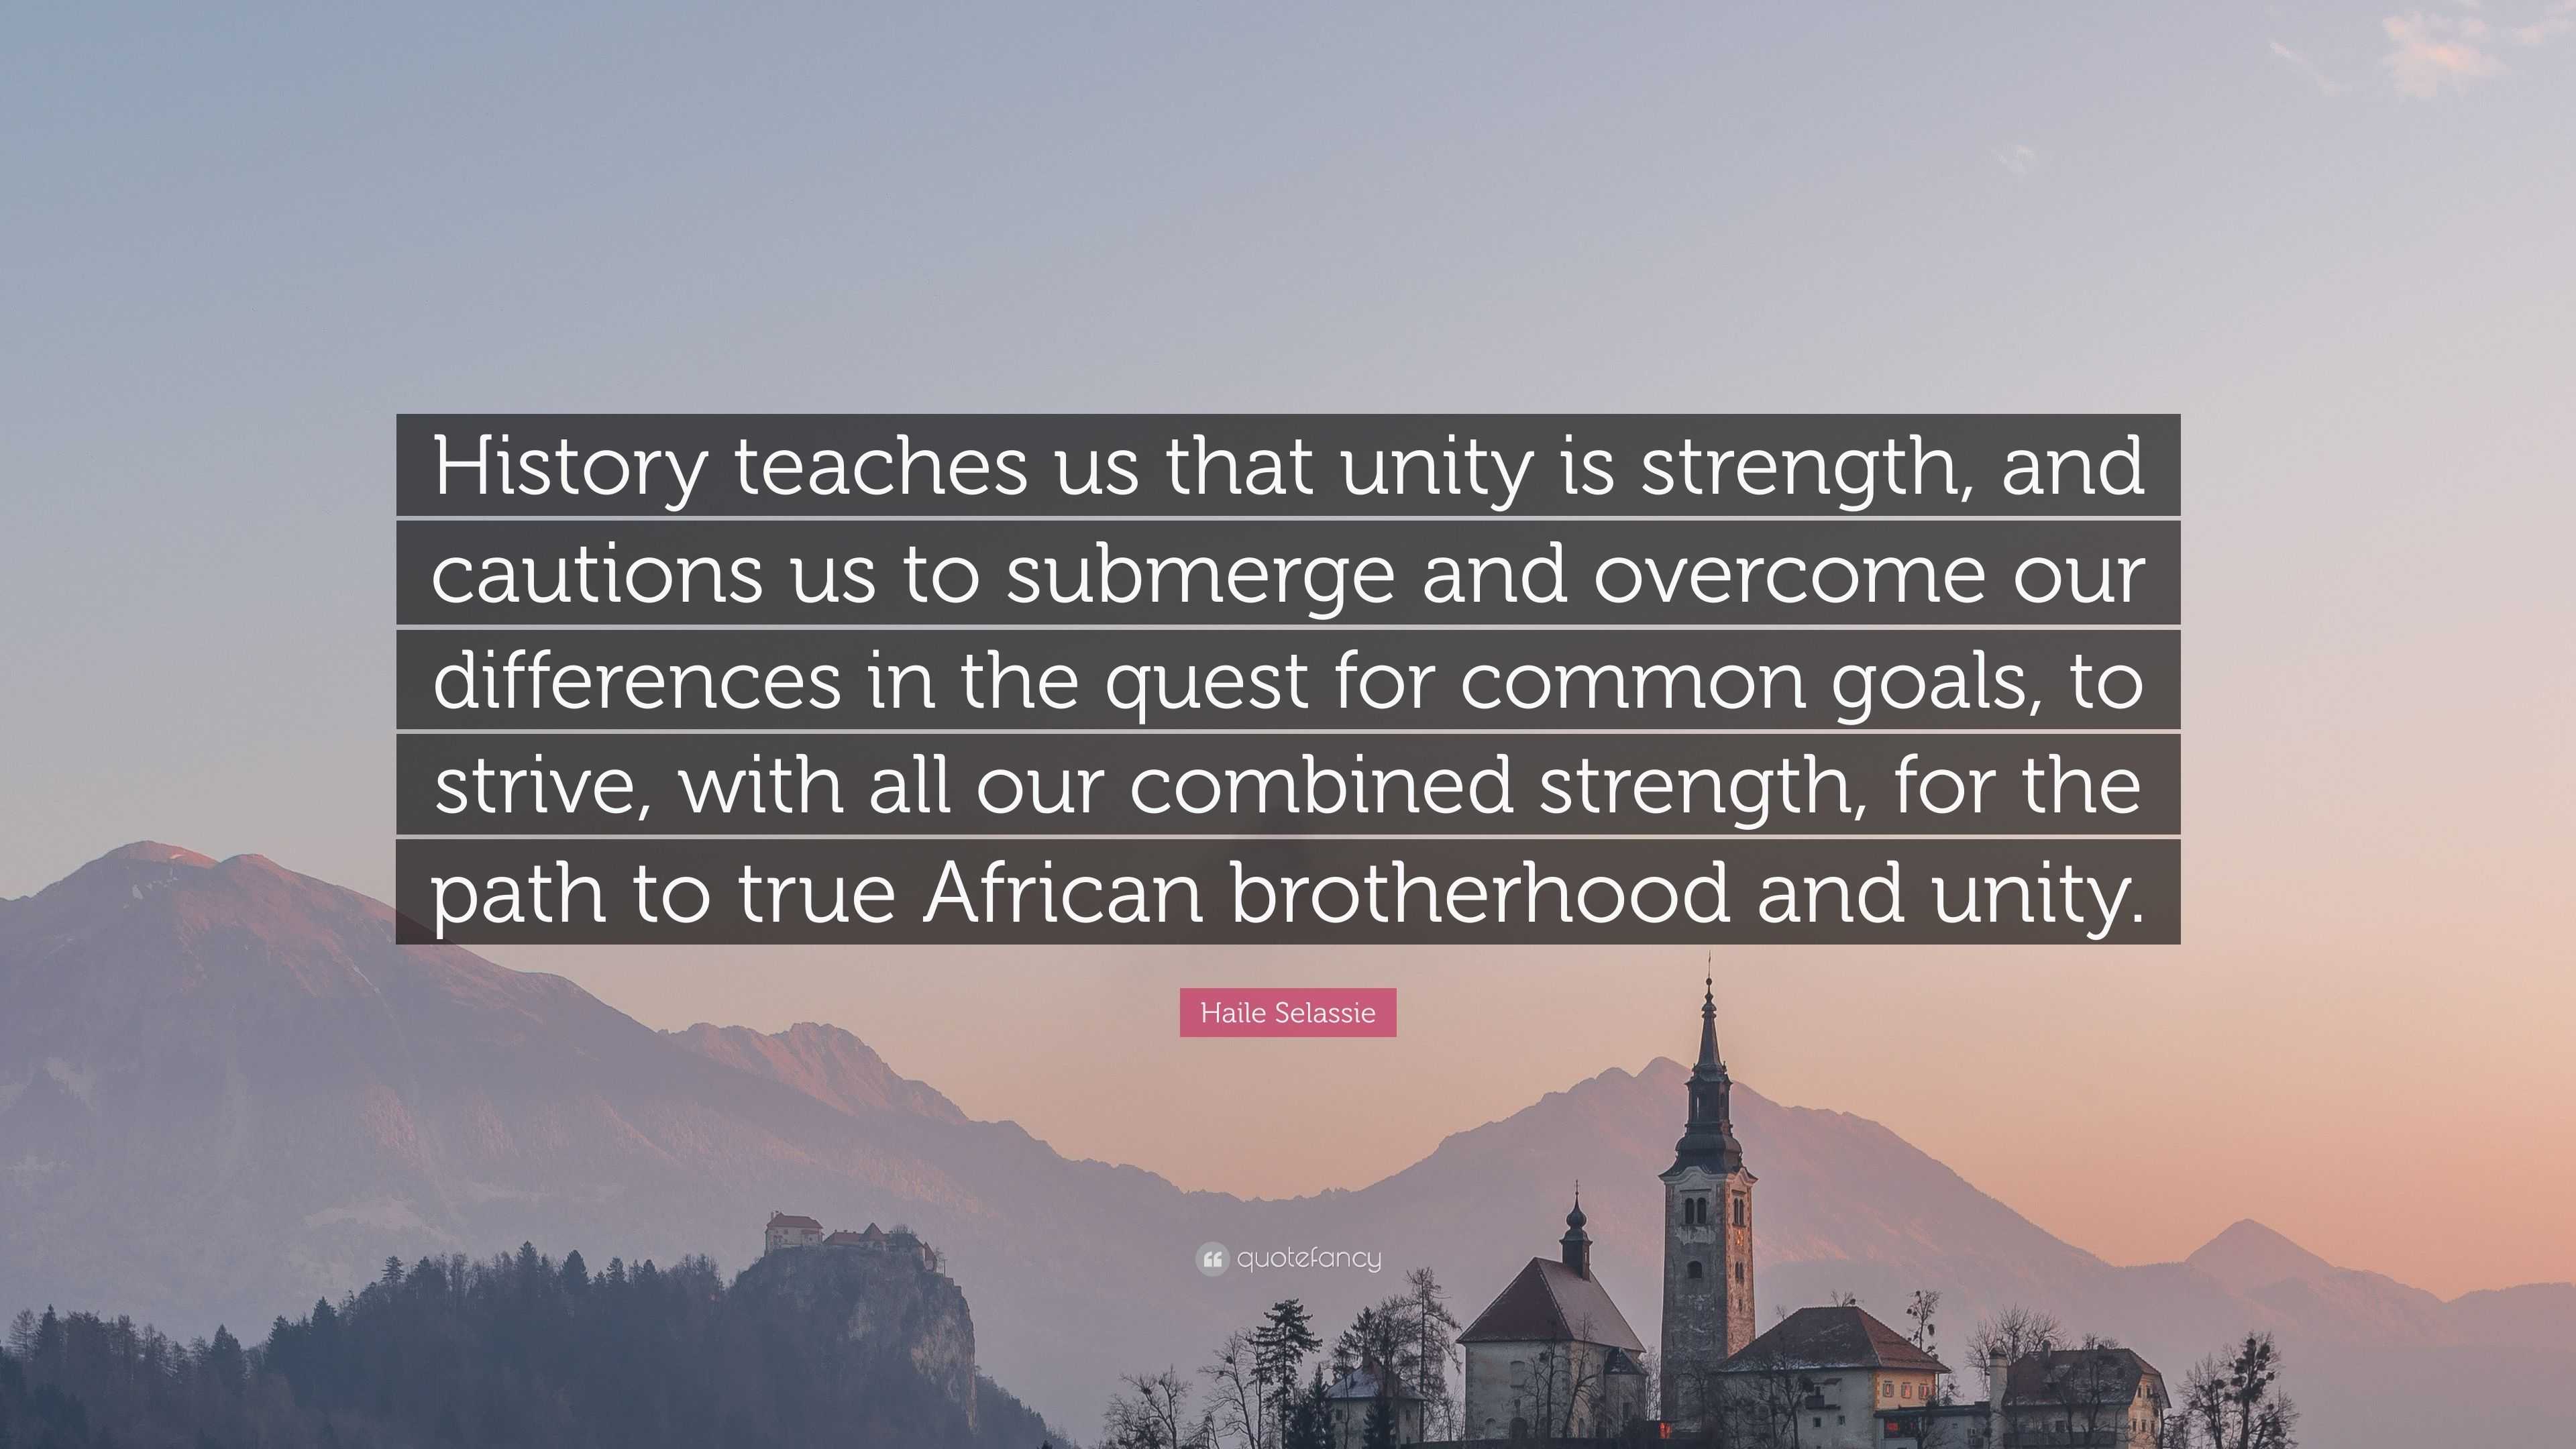 Haile Selassie Quote: “History teaches us that unity is strength, and